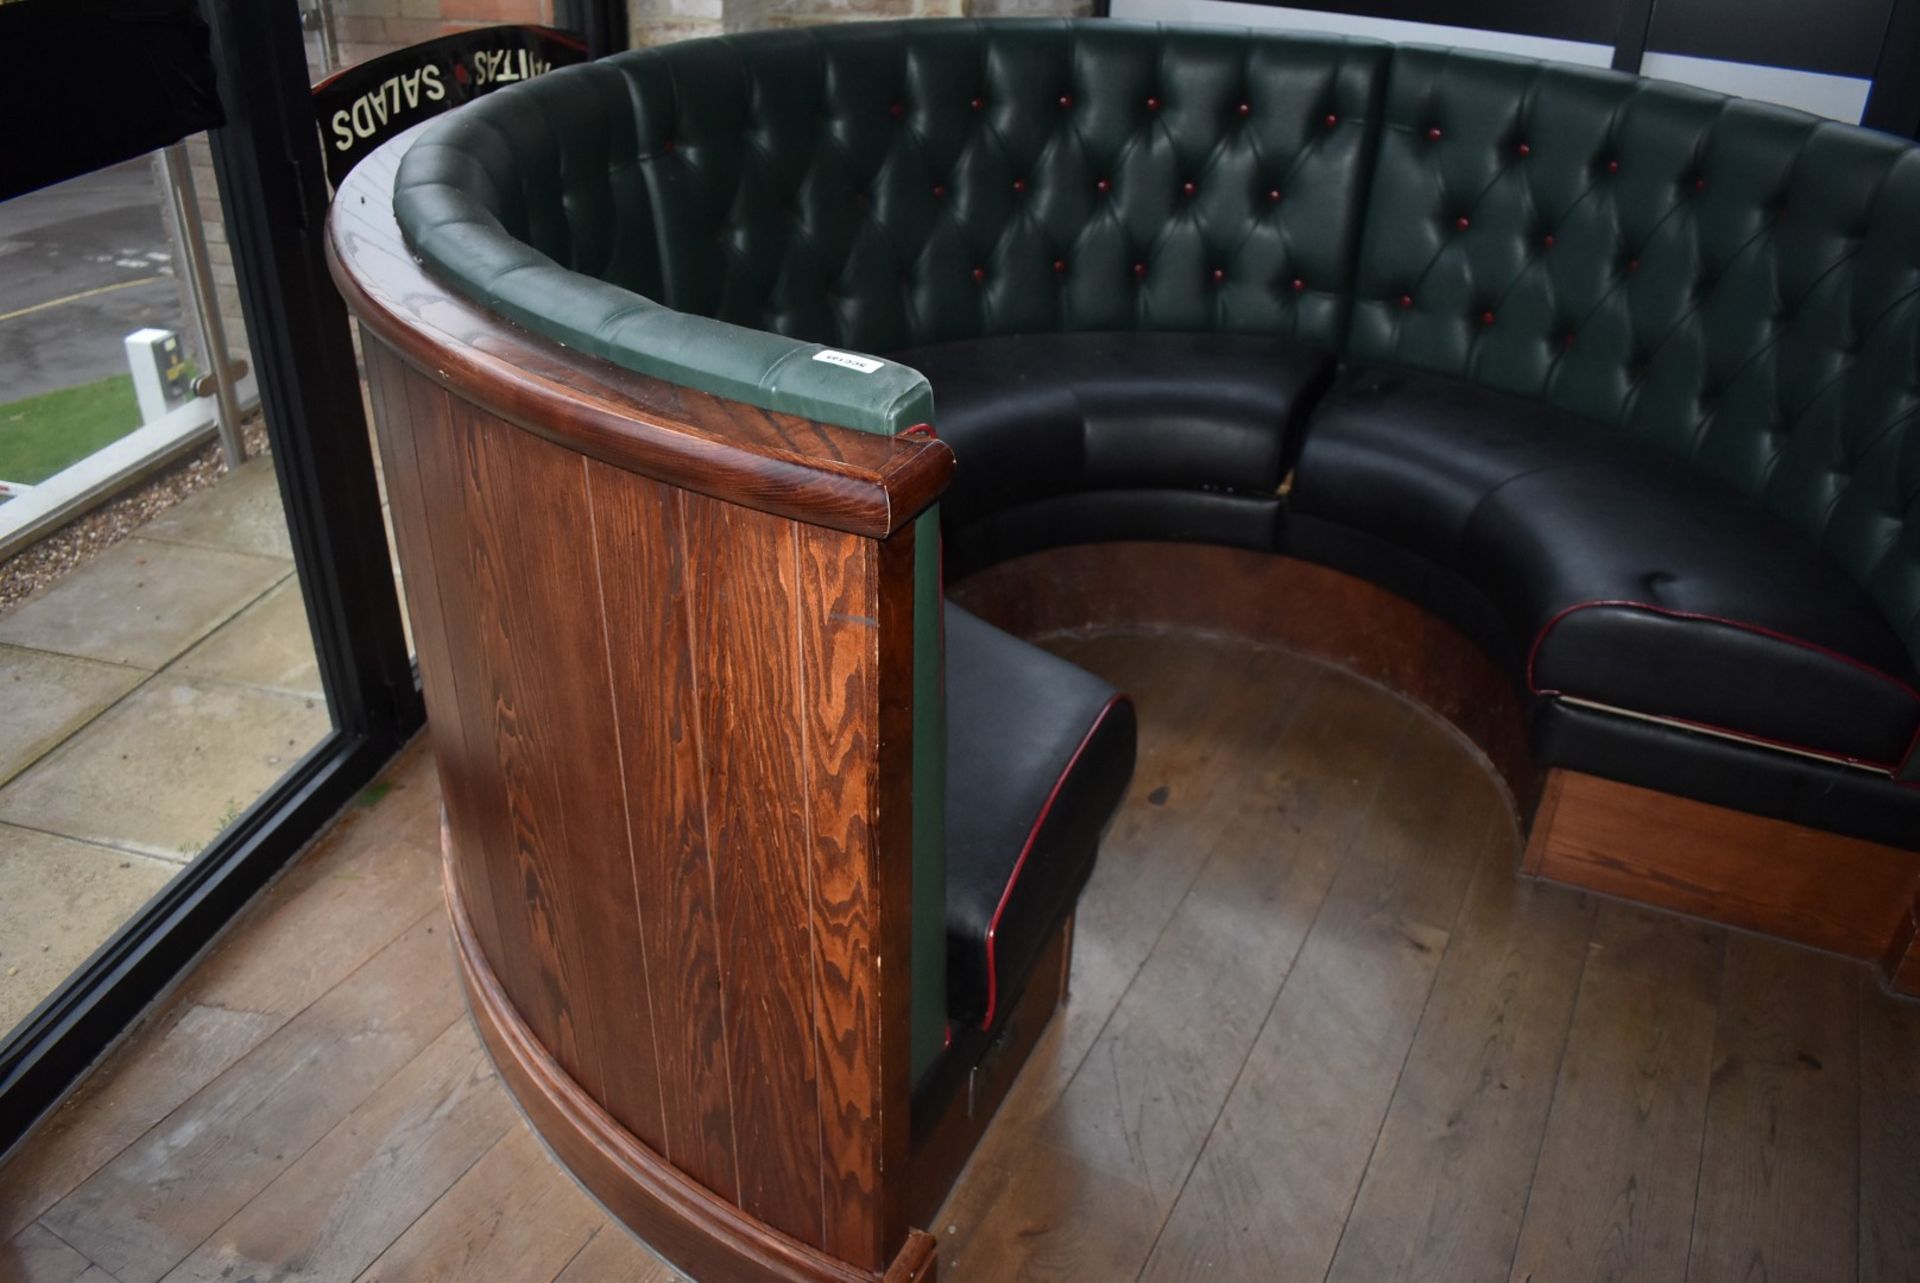 1 x Restaurant C-Shape 6 Person Seating Booth - Green and Black Studded Leather Upholstery - Image 2 of 7